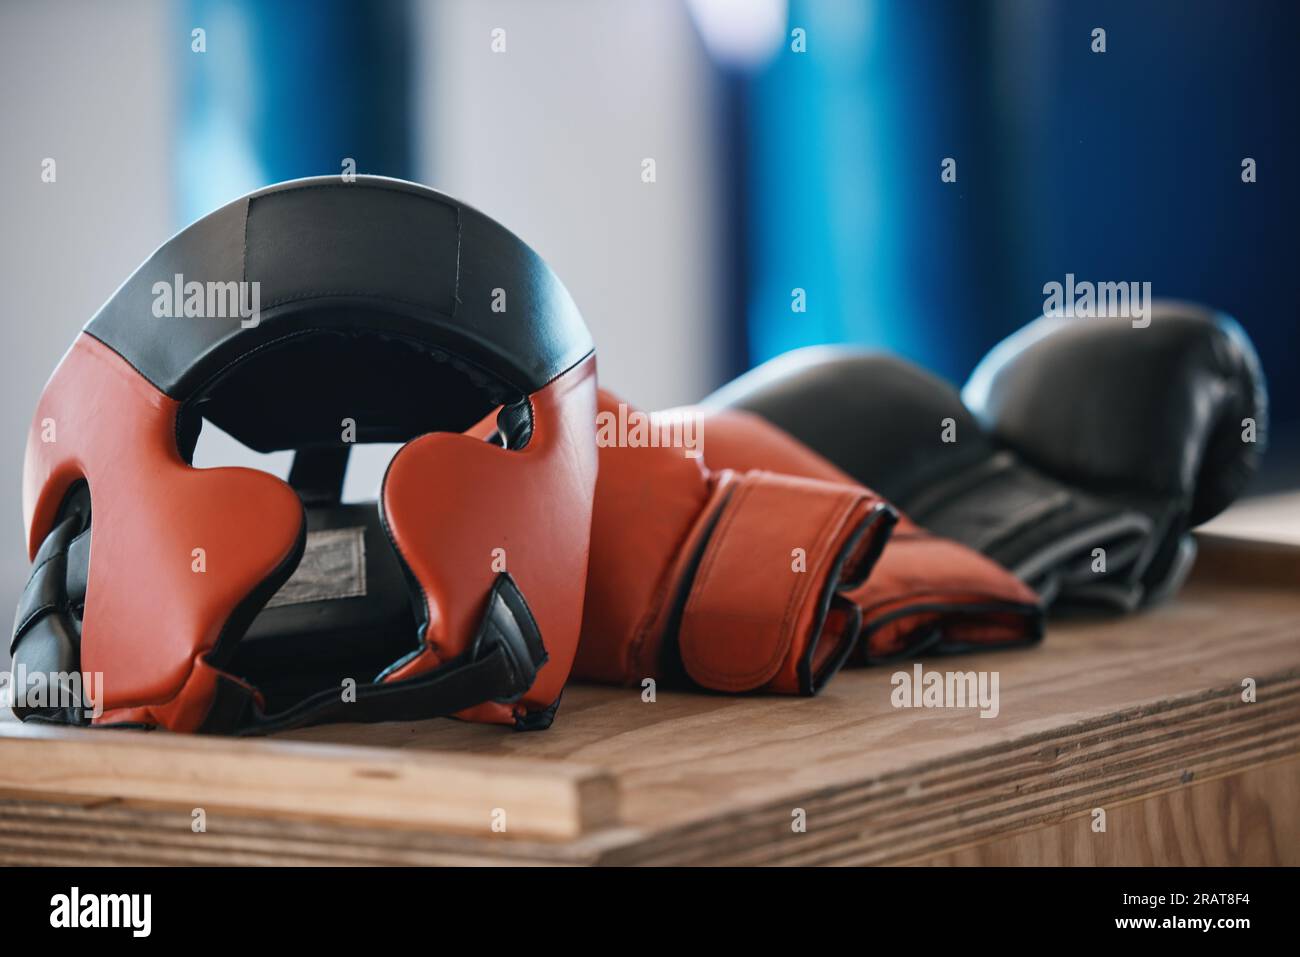 Fitness, boxing glove and workout for training in closeup in gym for mma competition for punch. Protection, exercise and fighting sport equipment at Stock Photo